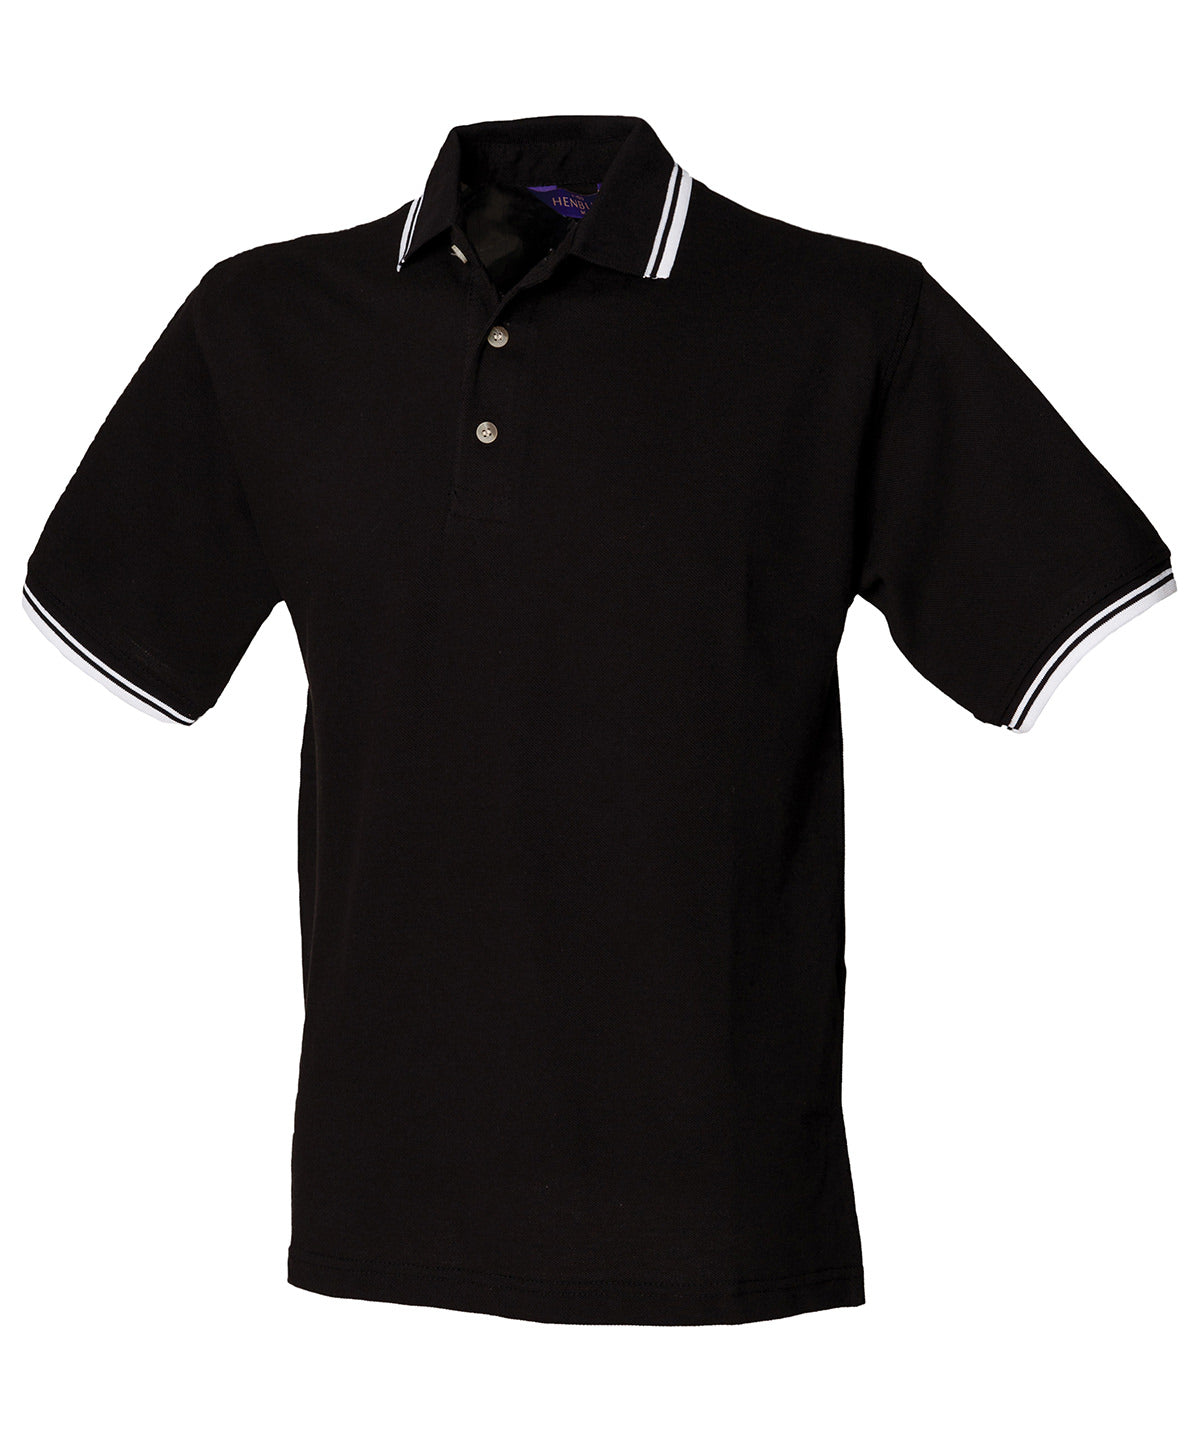 Personalised Polo Shirts - Black Henbury Double tipped collar and cuff polo shirt